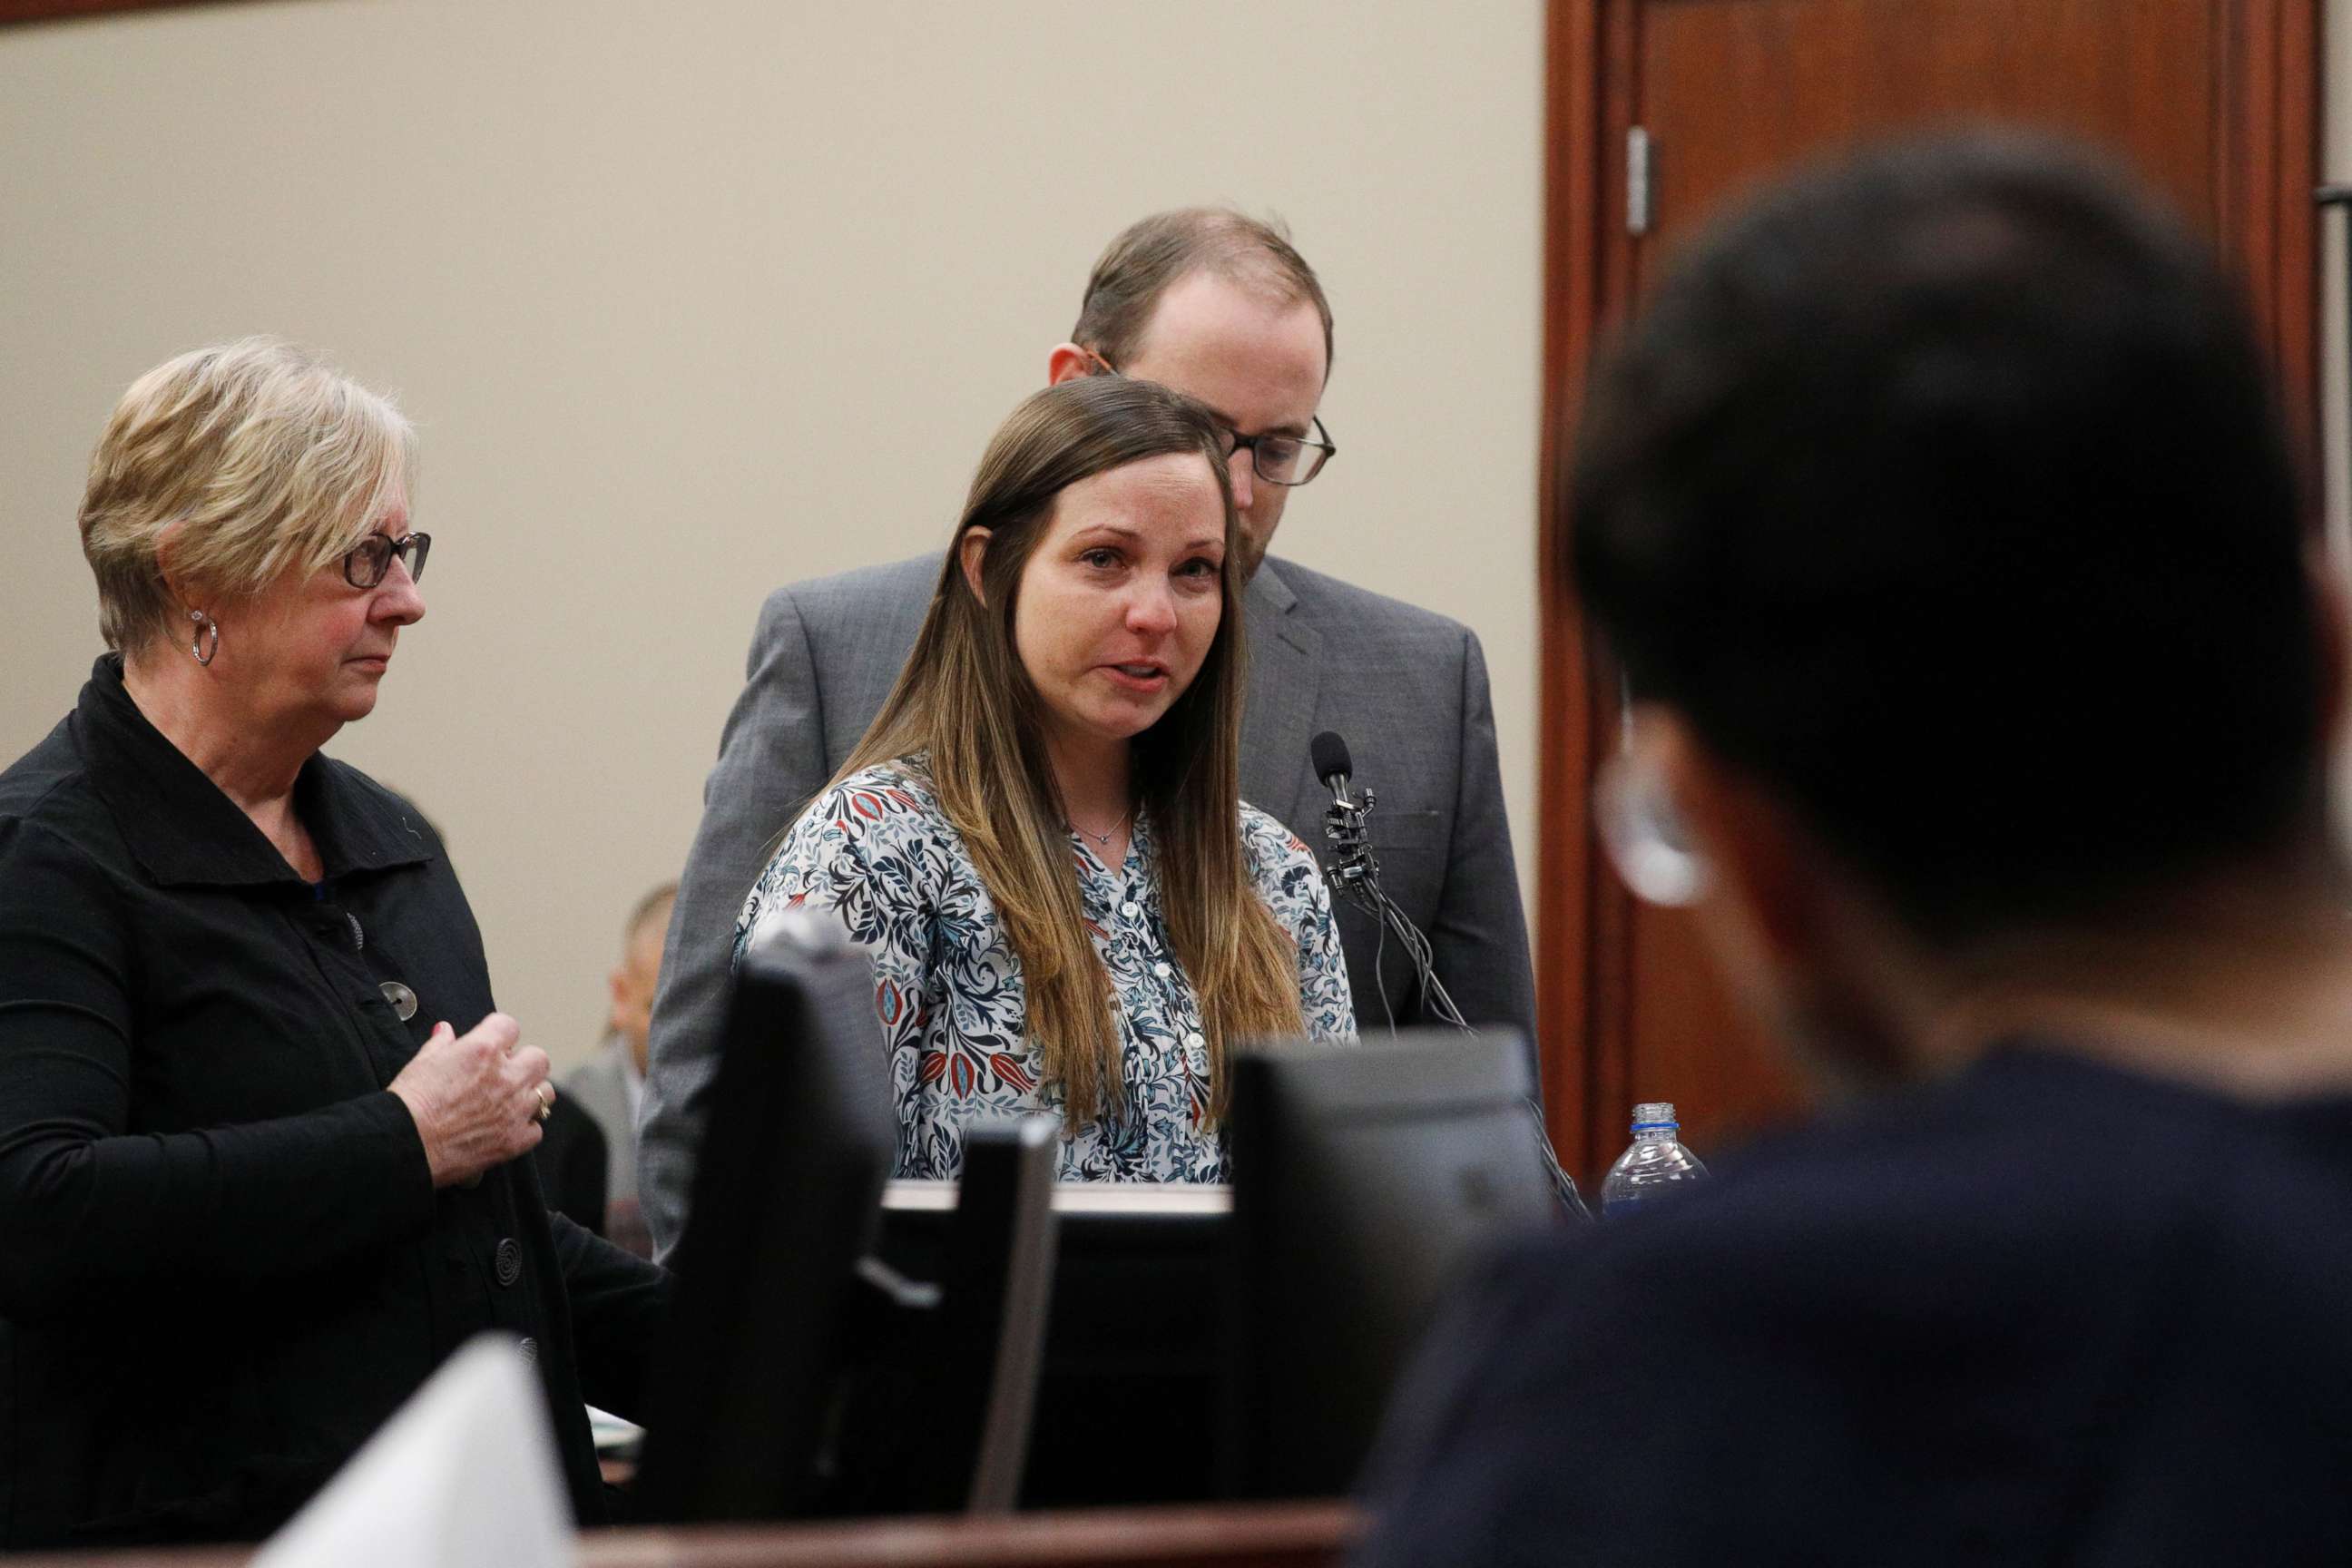 PHOTO: Victim Brianne Randall speaks at the sentencing hearing for Larry Nassar, a former team USA Gymnastics doctor who pleaded guilty in November 2017 to sexual assault charges, in Lansing, Mich., Jan. 23, 2018.